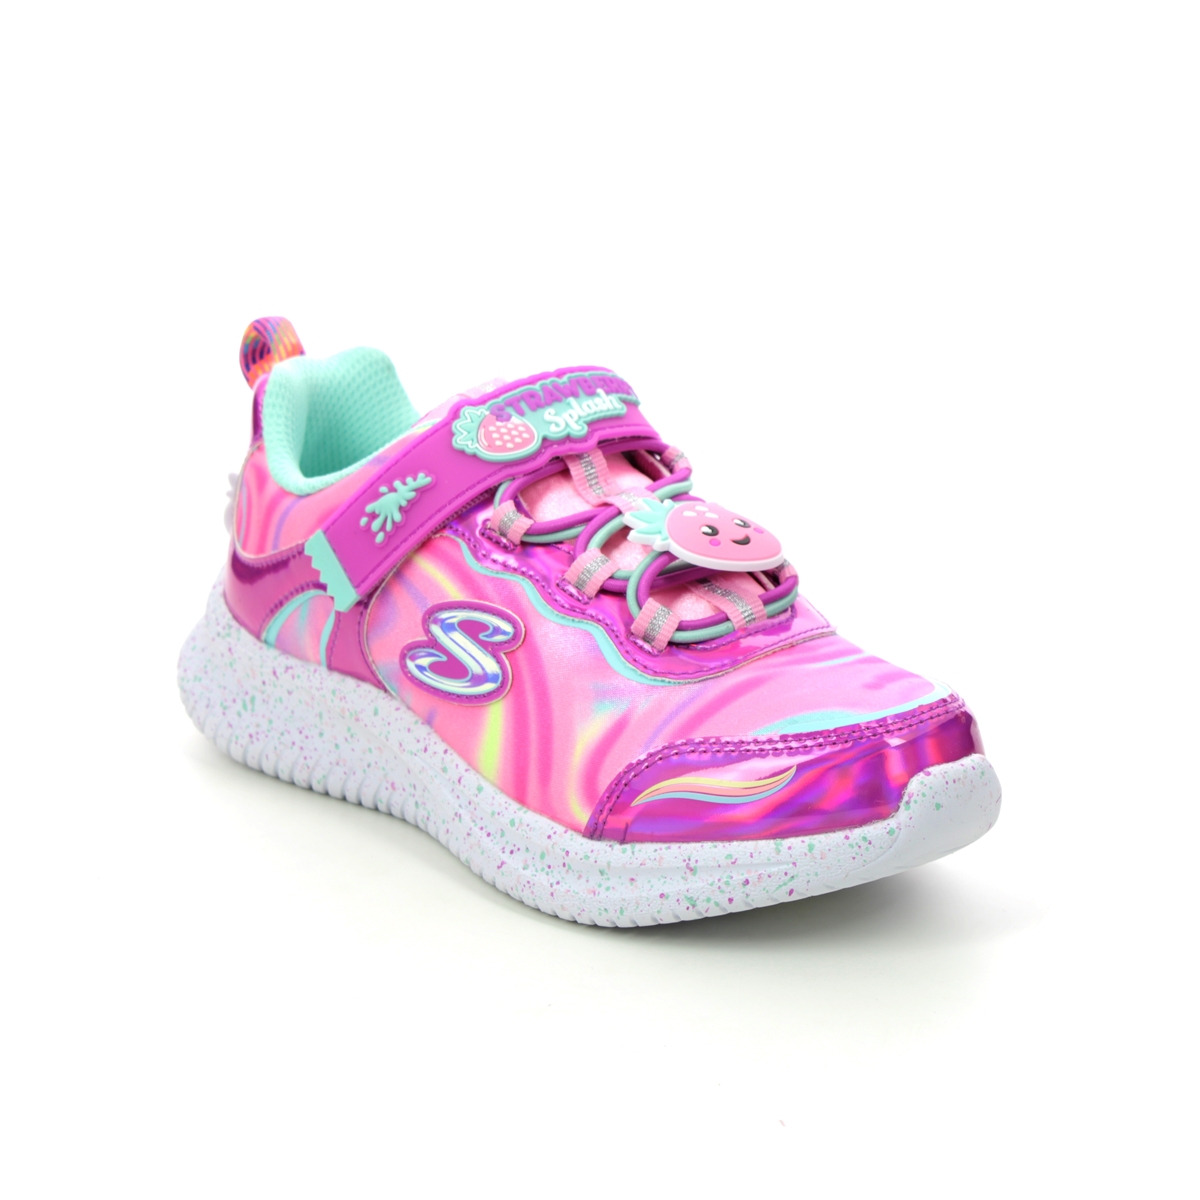 Skechers Jumpsters Sweet Pink Kids Girls Trainers 302215L In Size 30 In Plain Pink For kids